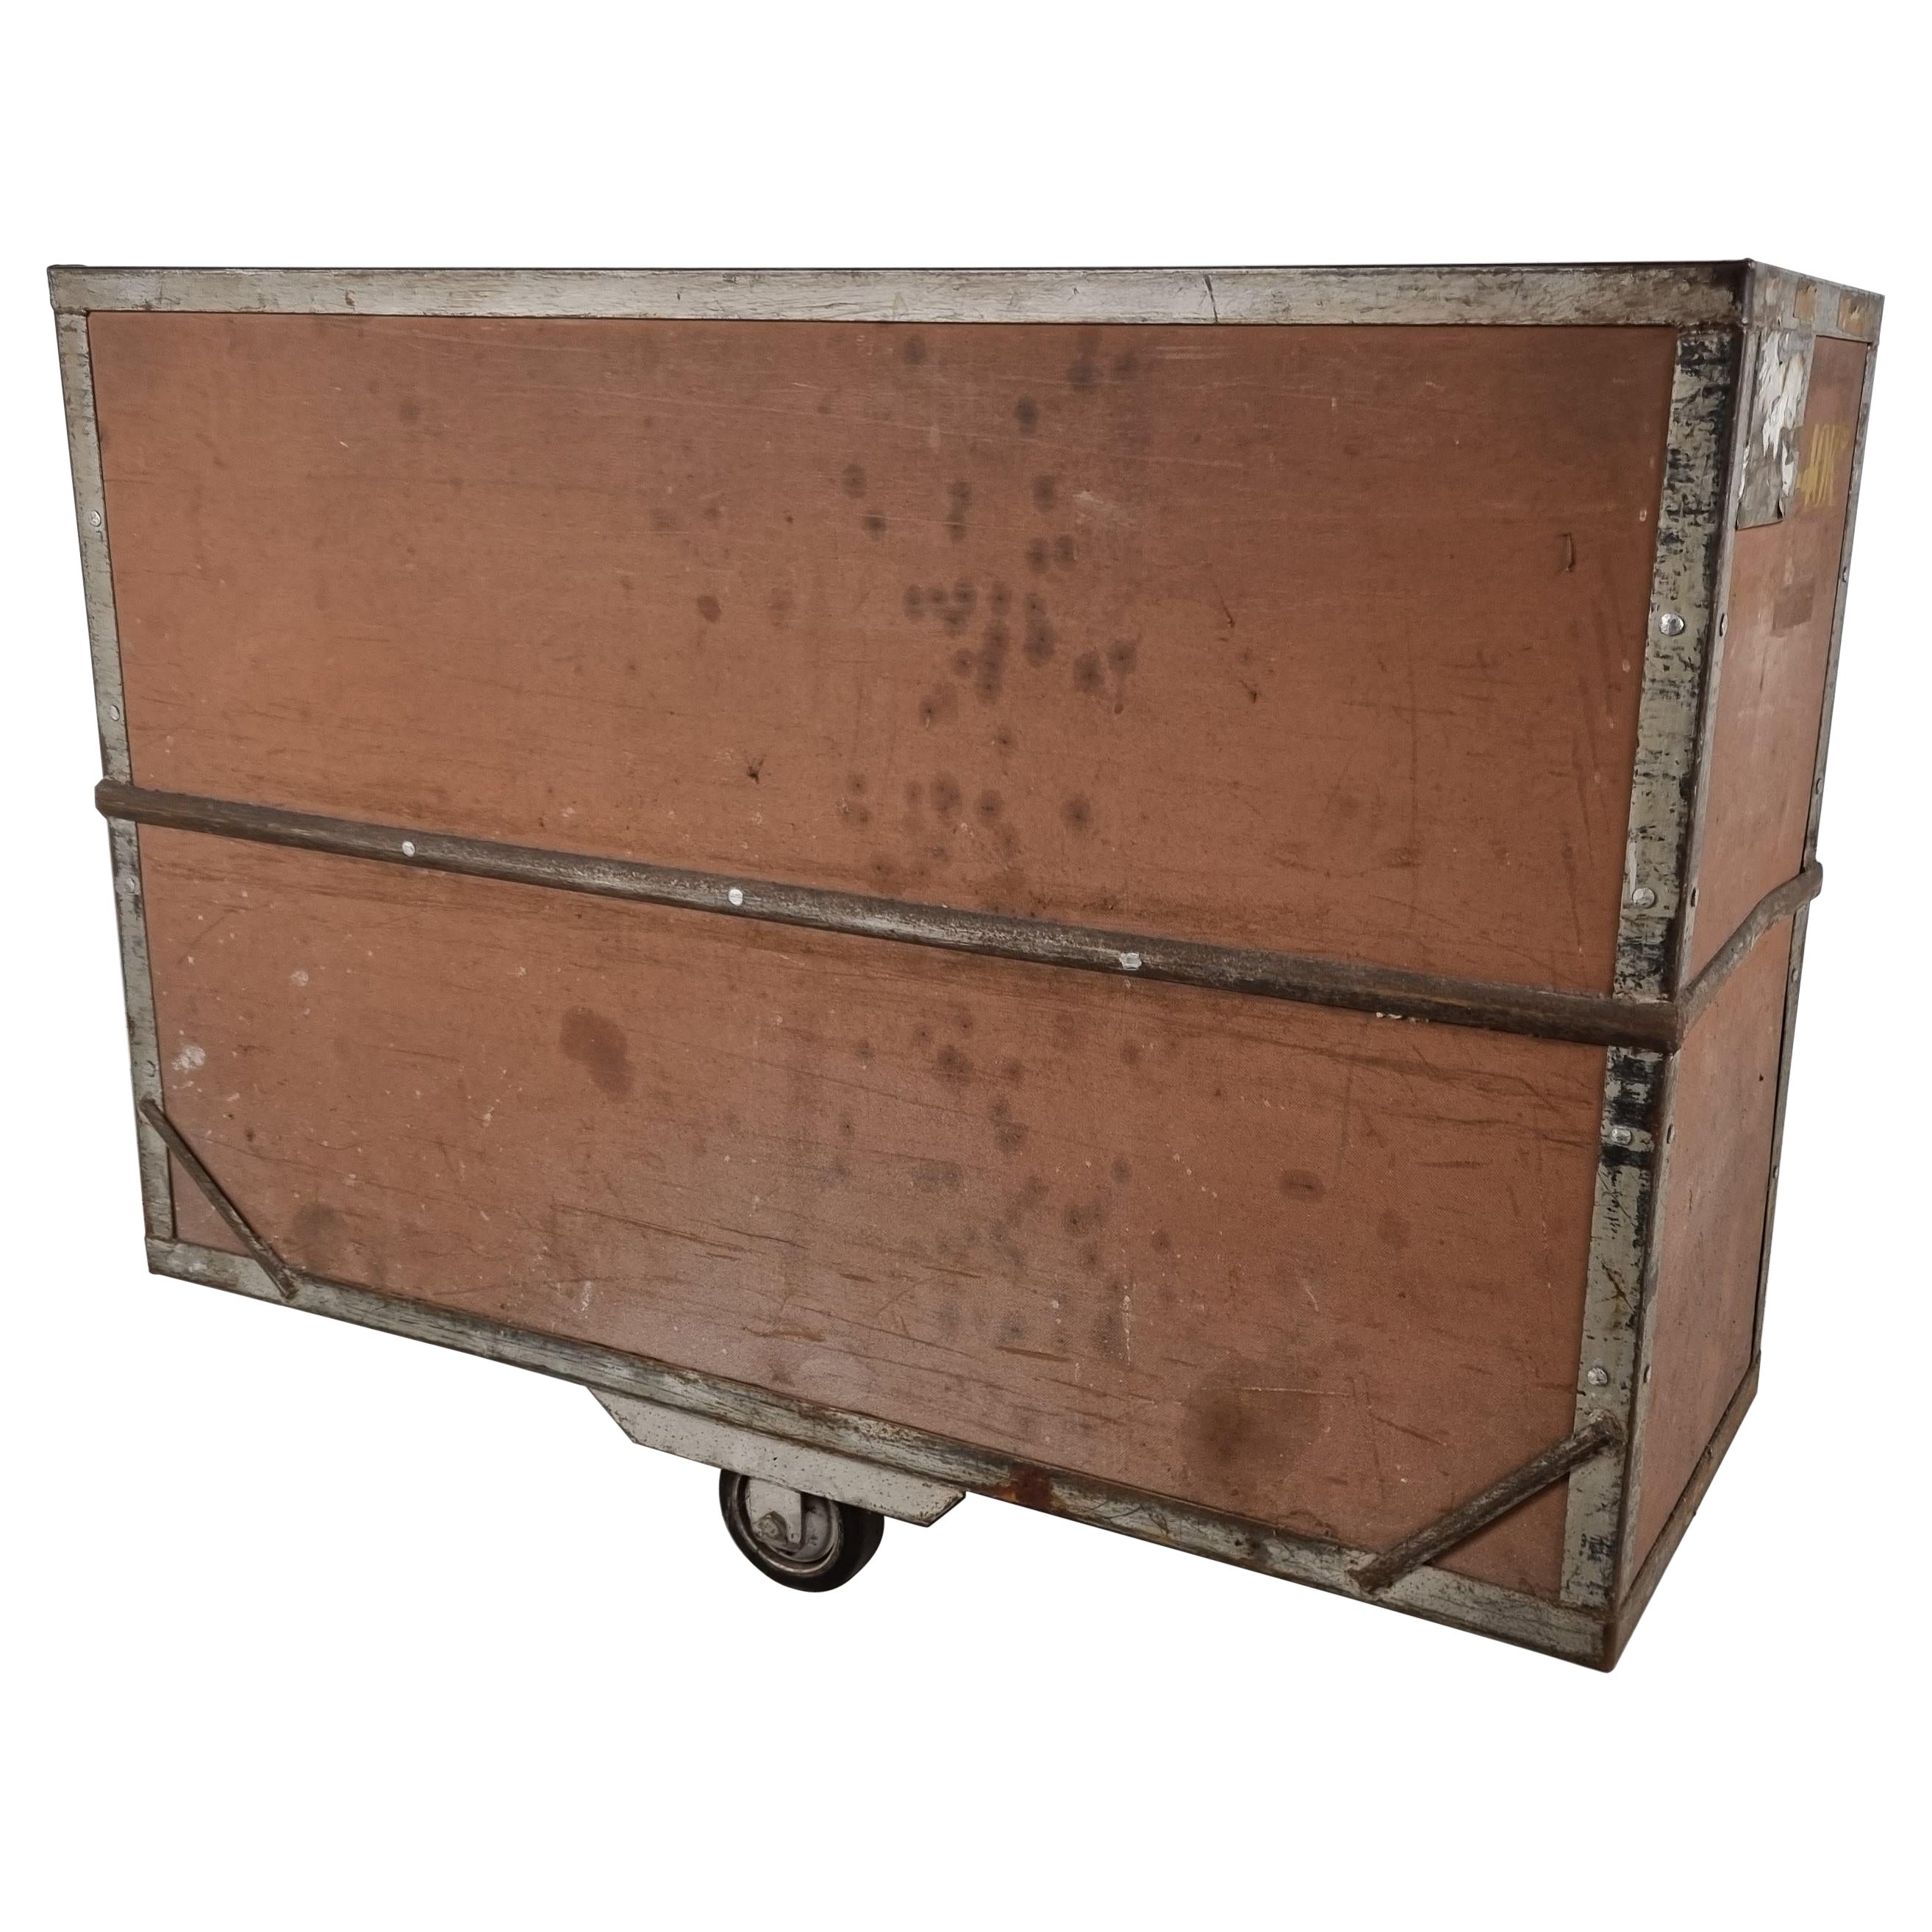 Vintage Industrial Steel and Wooden Trolley, 1950s For Sale